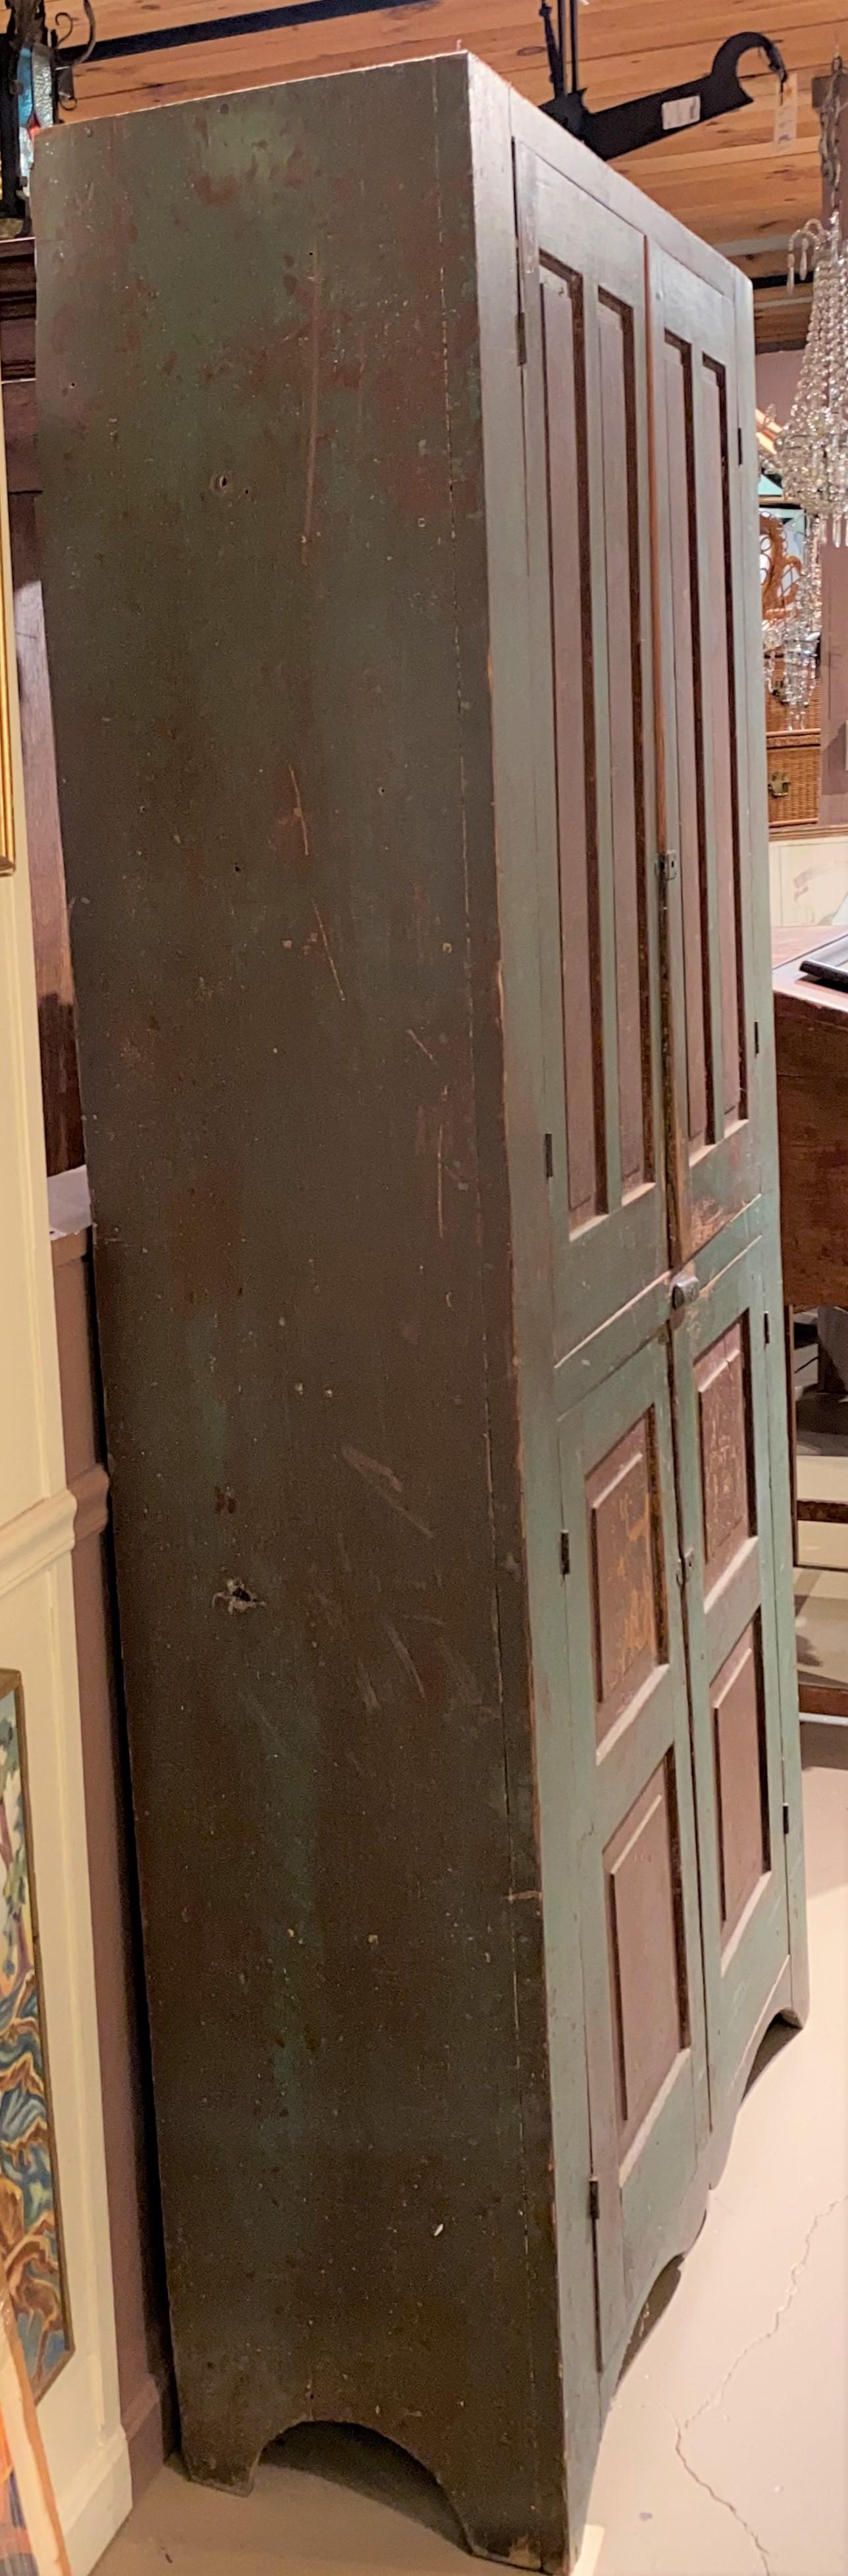 Early 19th Century New England Paneled Cupboard in Green & Reddish Brown Paint In Good Condition For Sale In Milford, NH